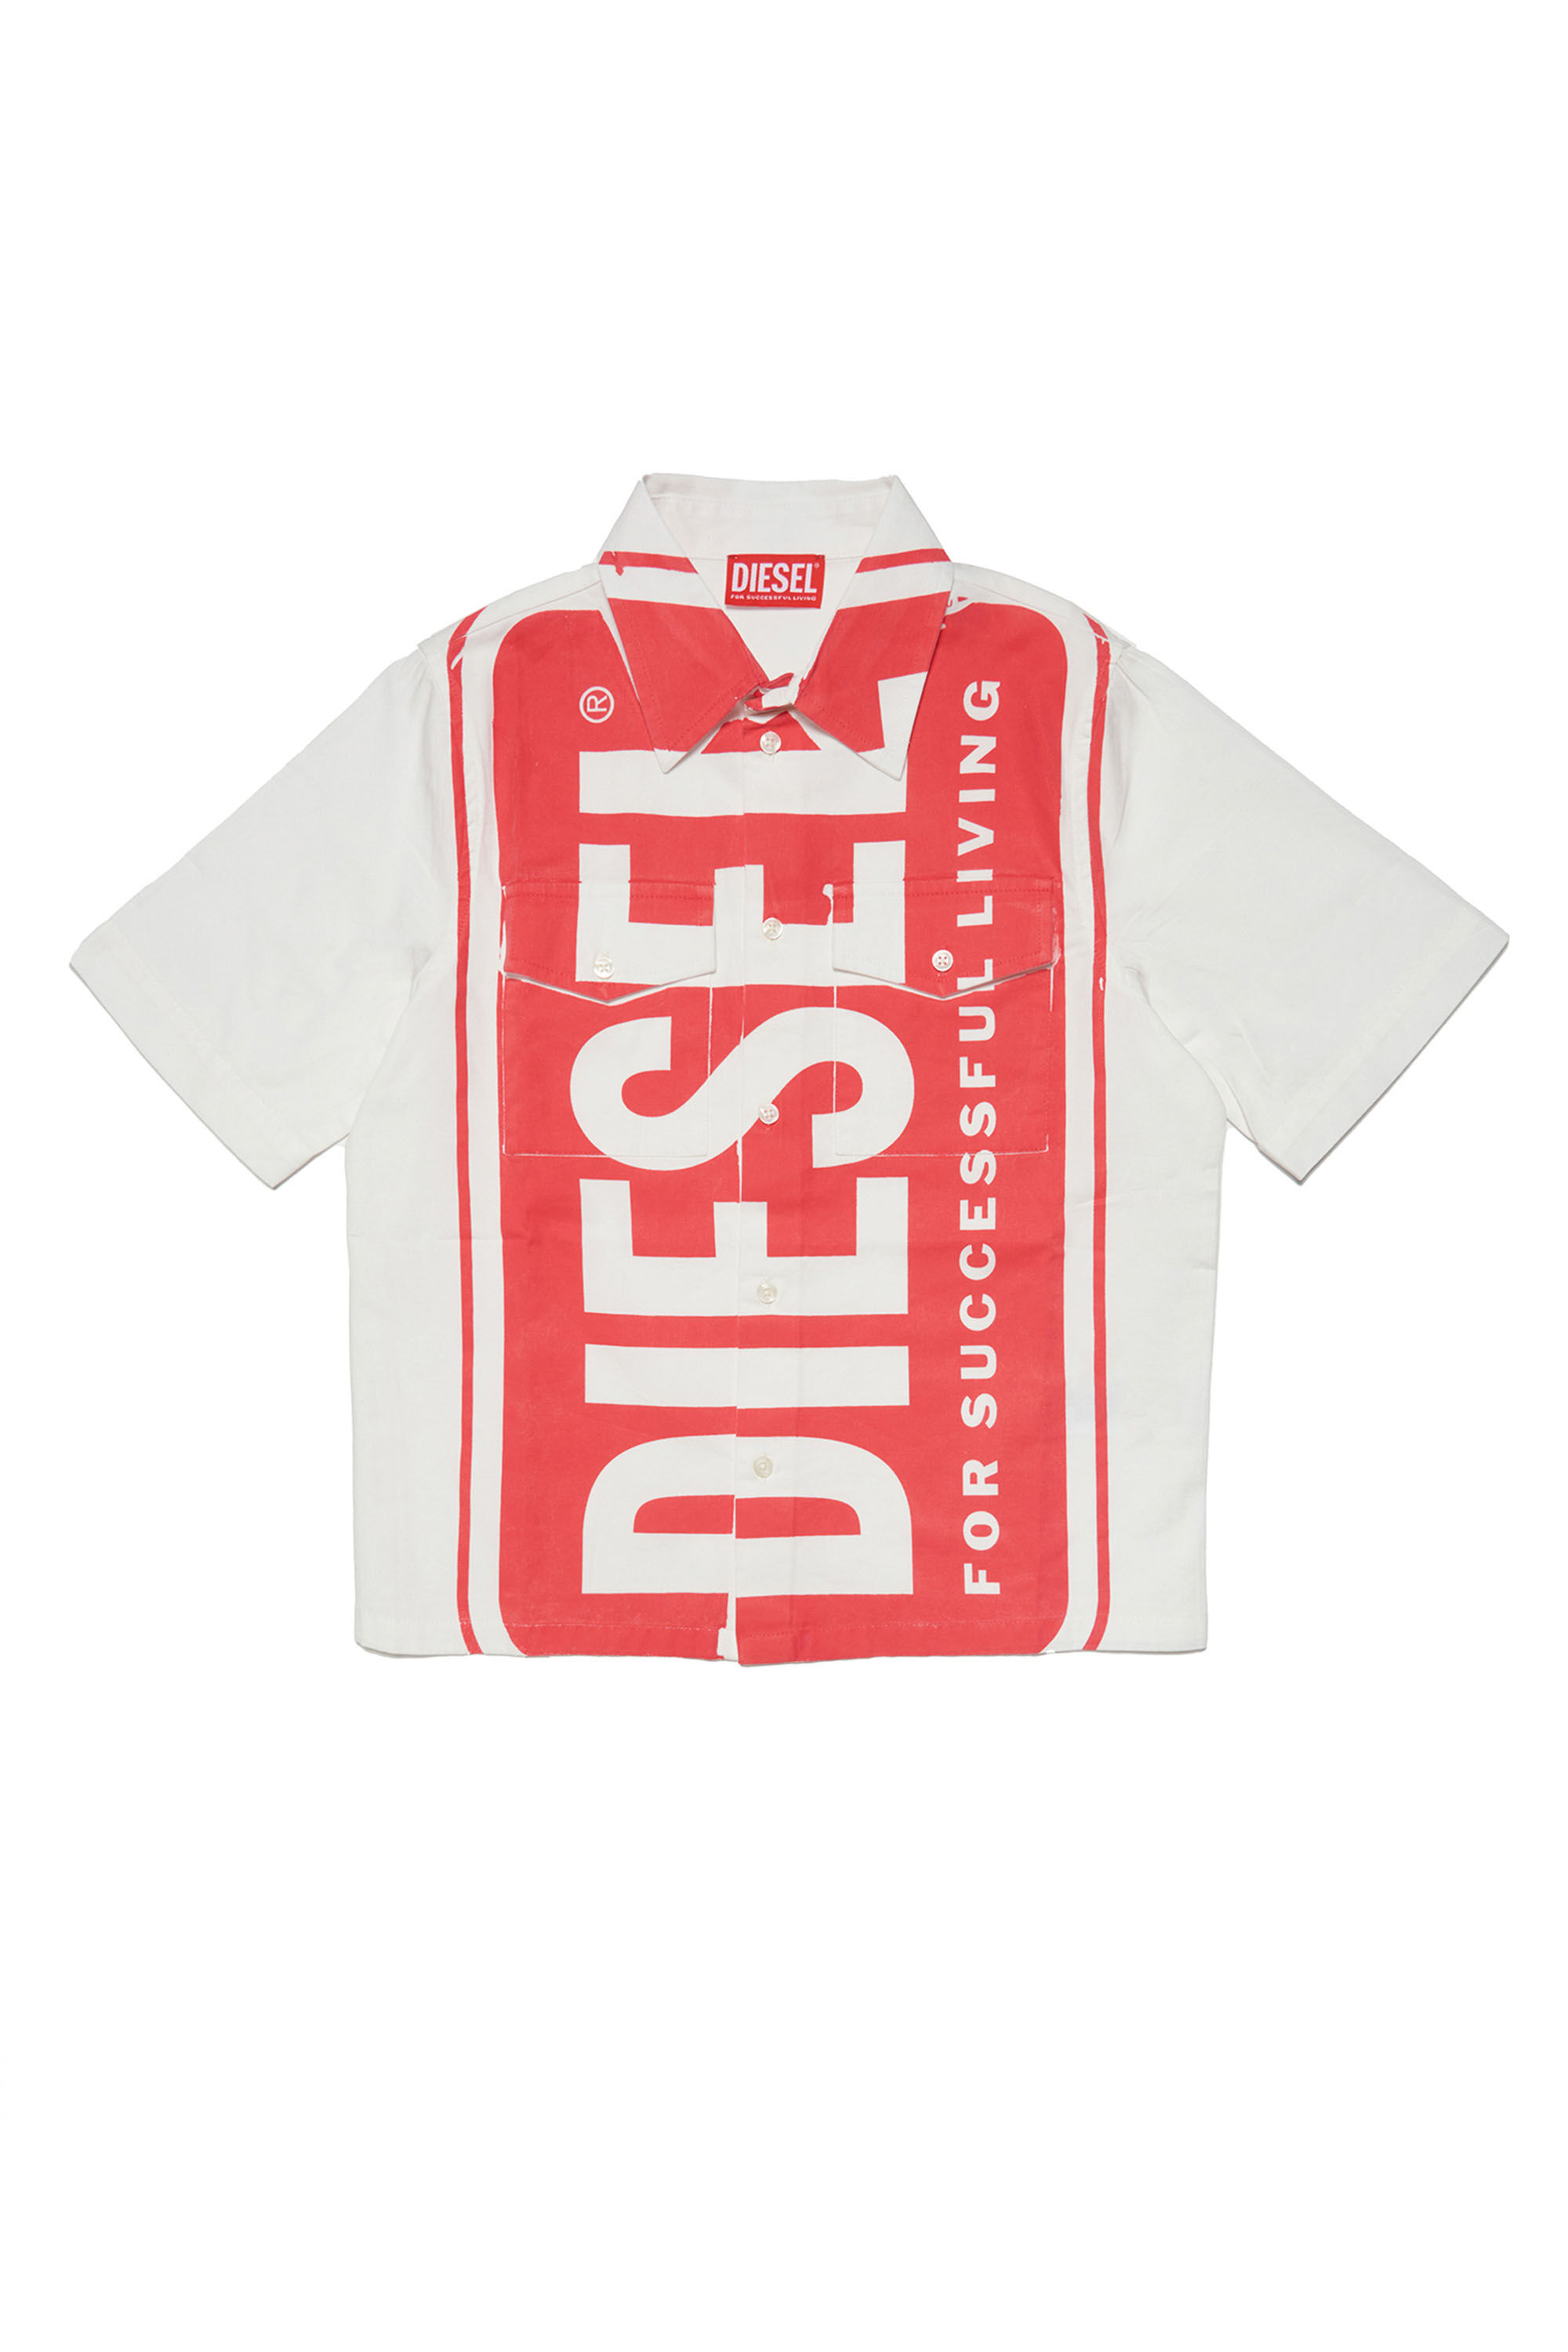 Diesel - CRISS, White/Red - Image 1